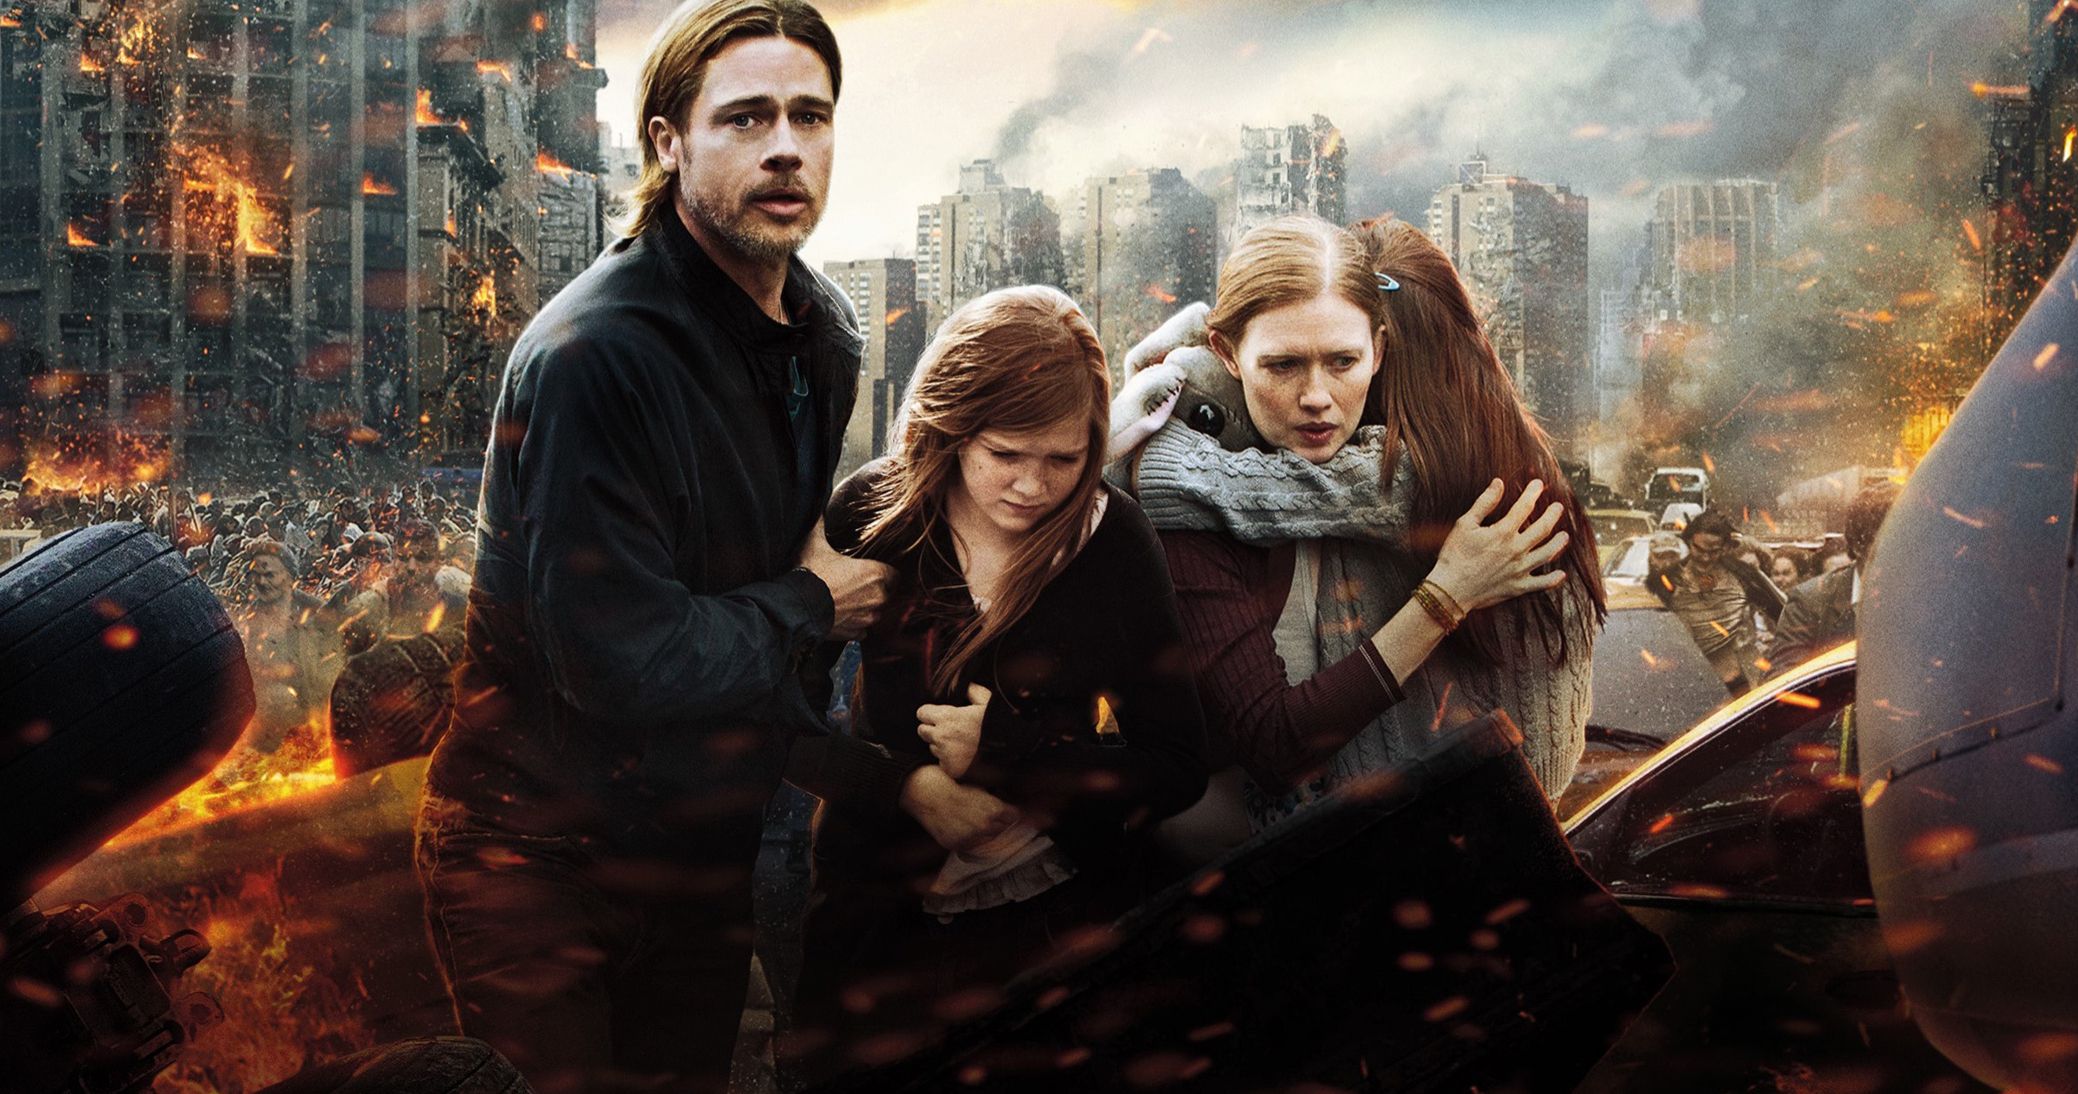 One Cast Member Still Holds Out Hope For 'World War Z' Sequel